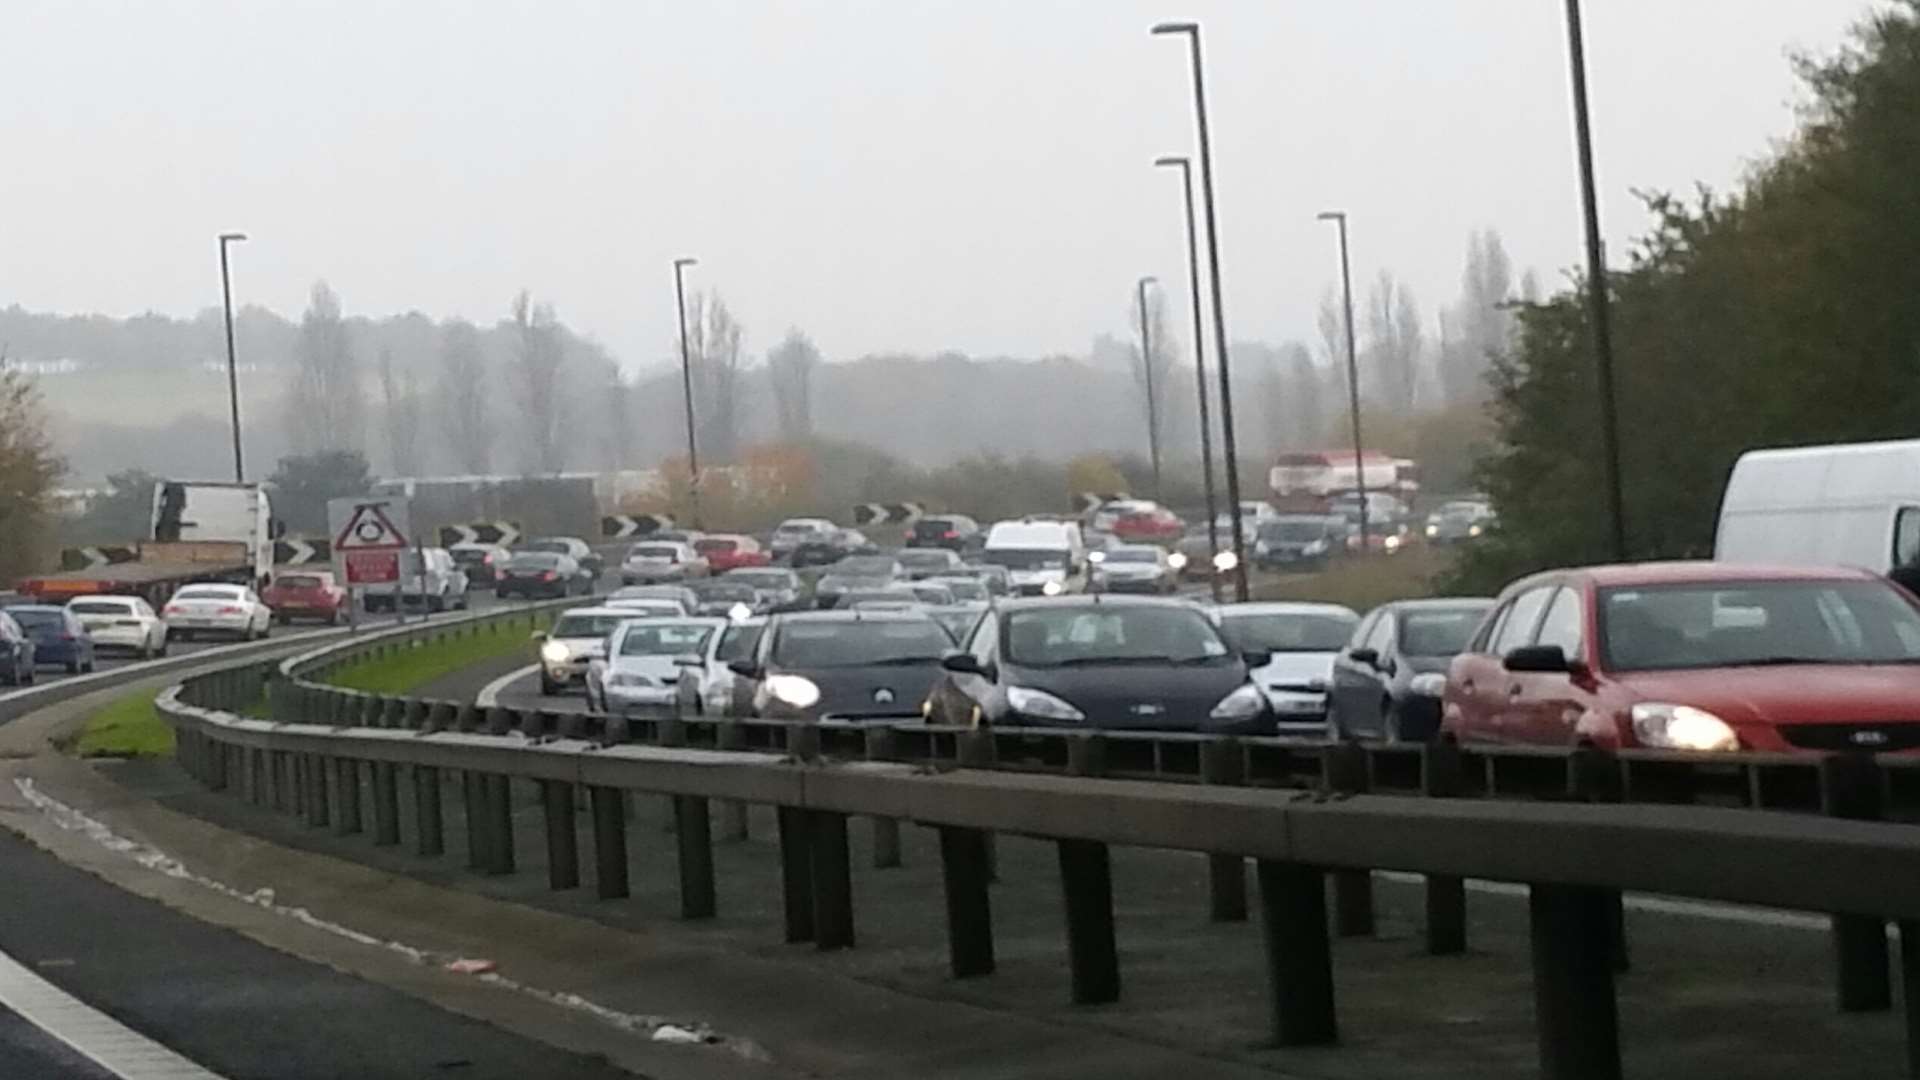 Delays built up on the A2 and M2 after the works overran this morning